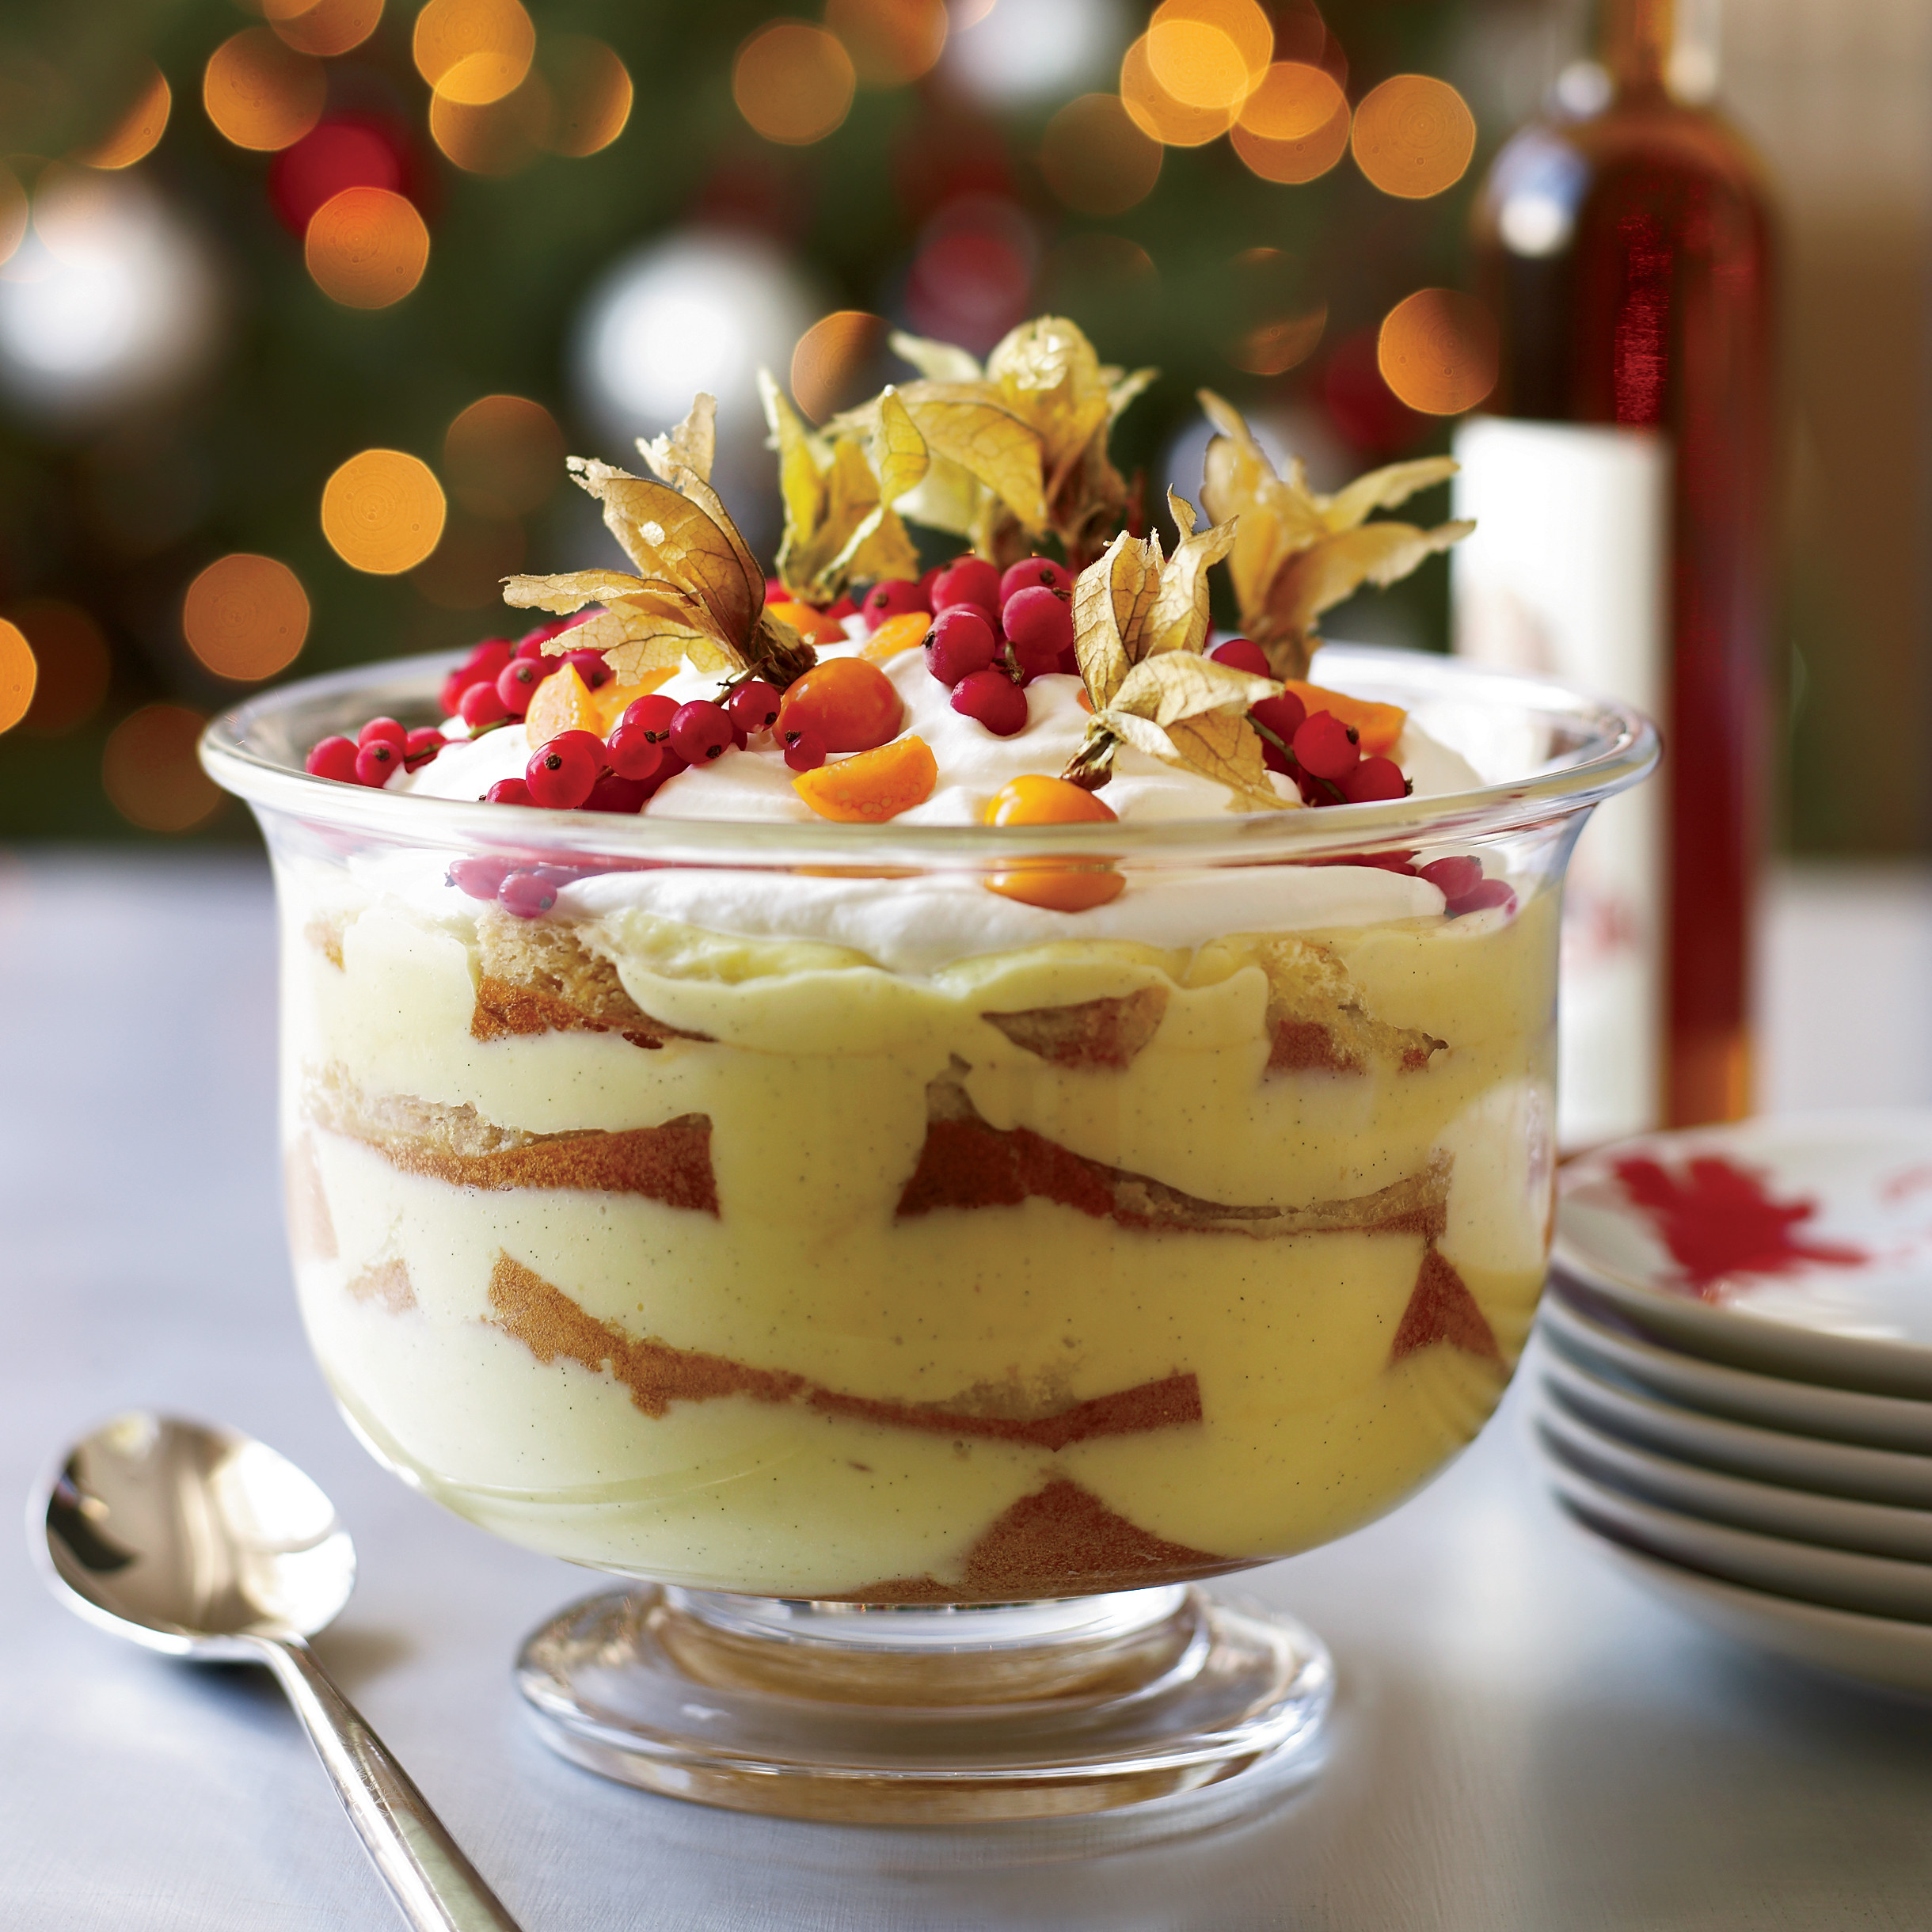 Pictures Of Christmas Desserts
 Italian Trifle with Marsala Syrup Recipe Fabio Trabocchi